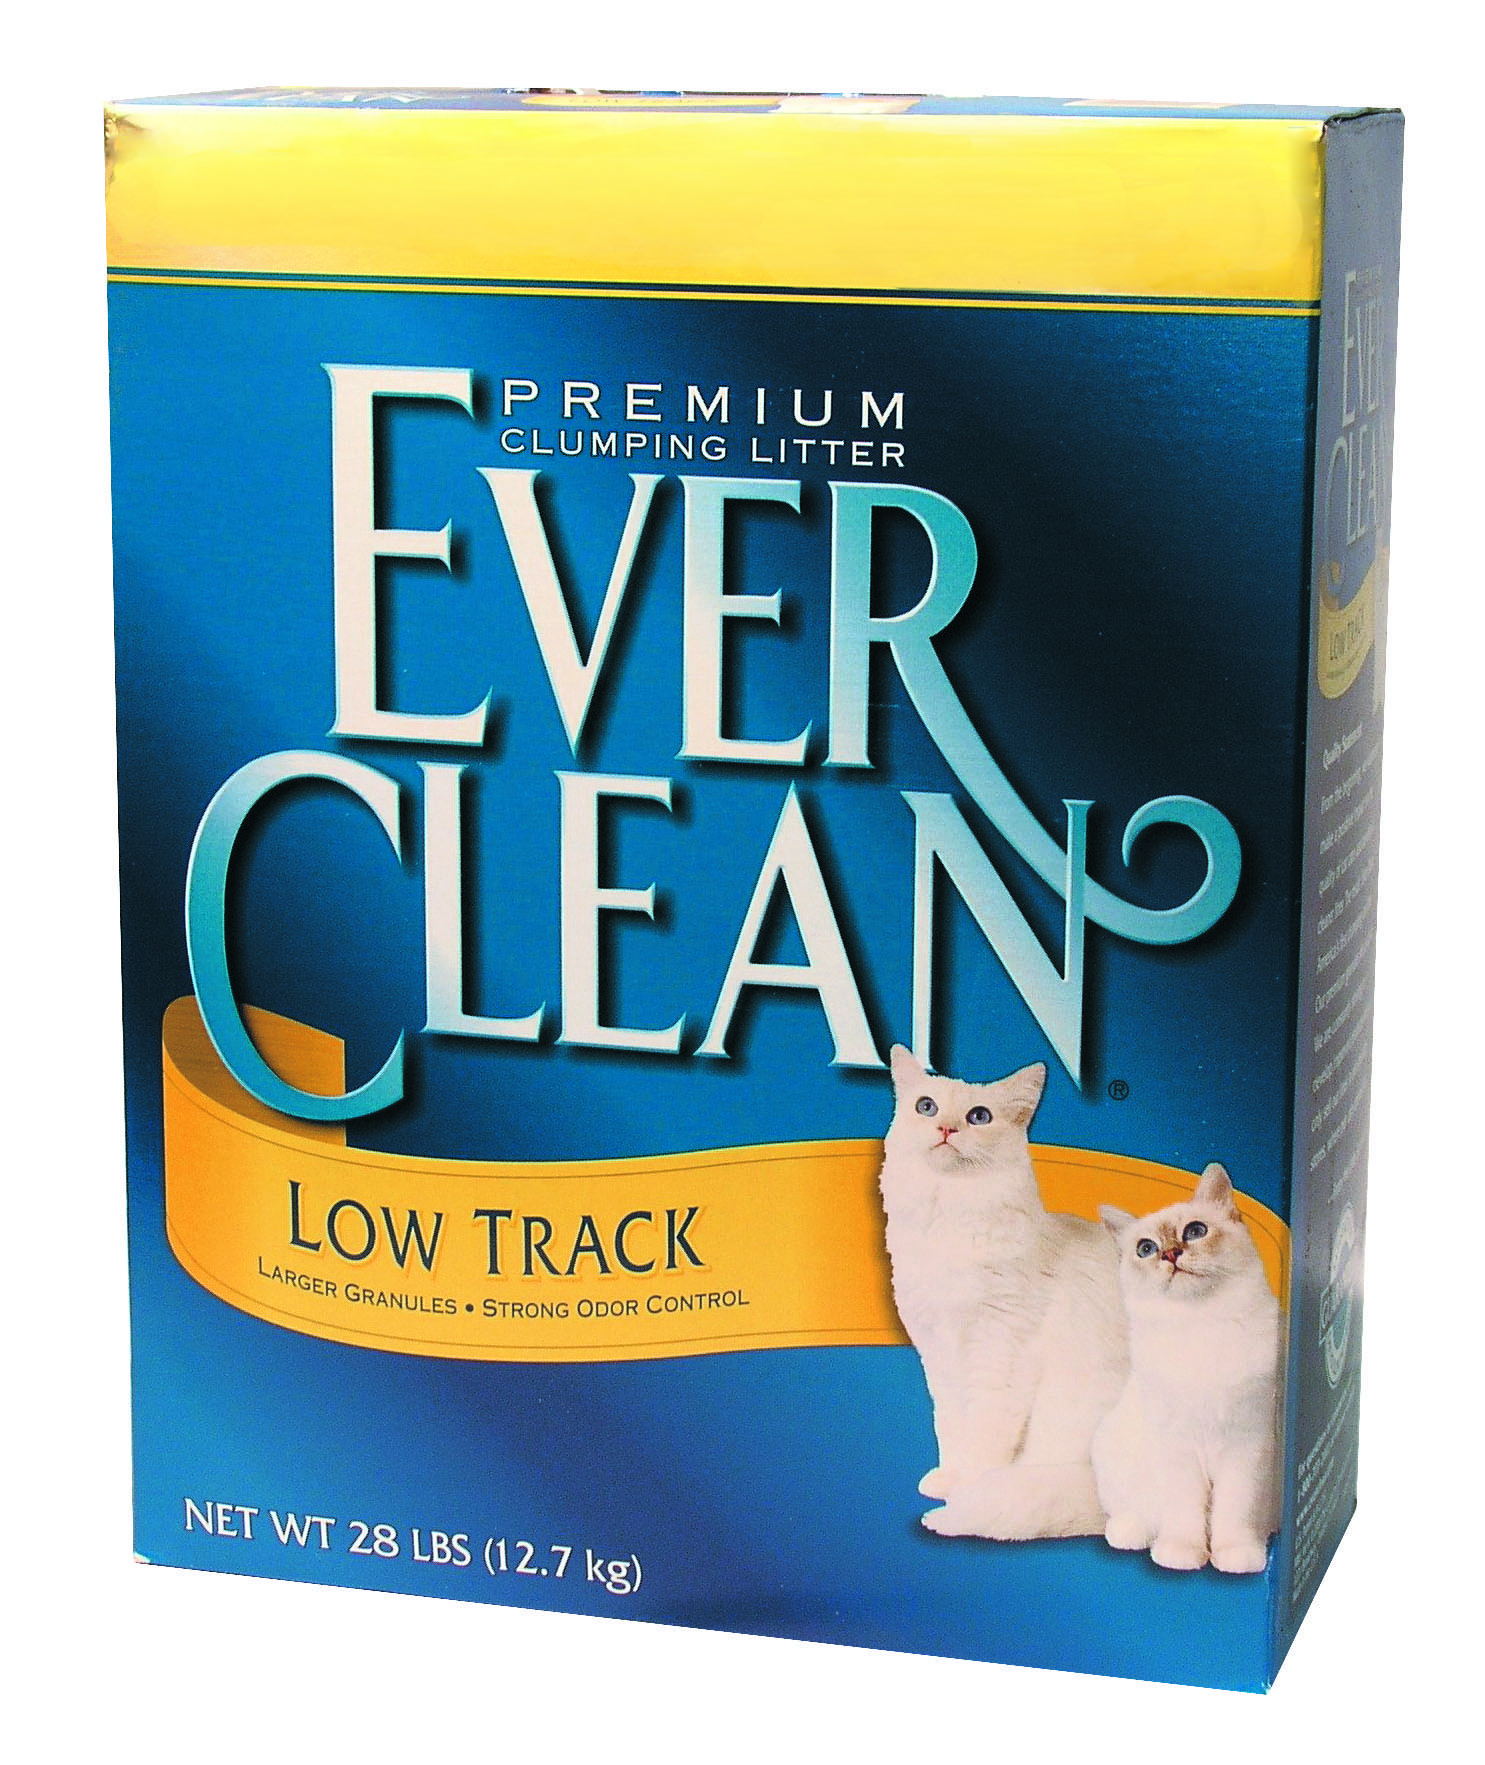 EVER CLEAN SCENTED LITTER